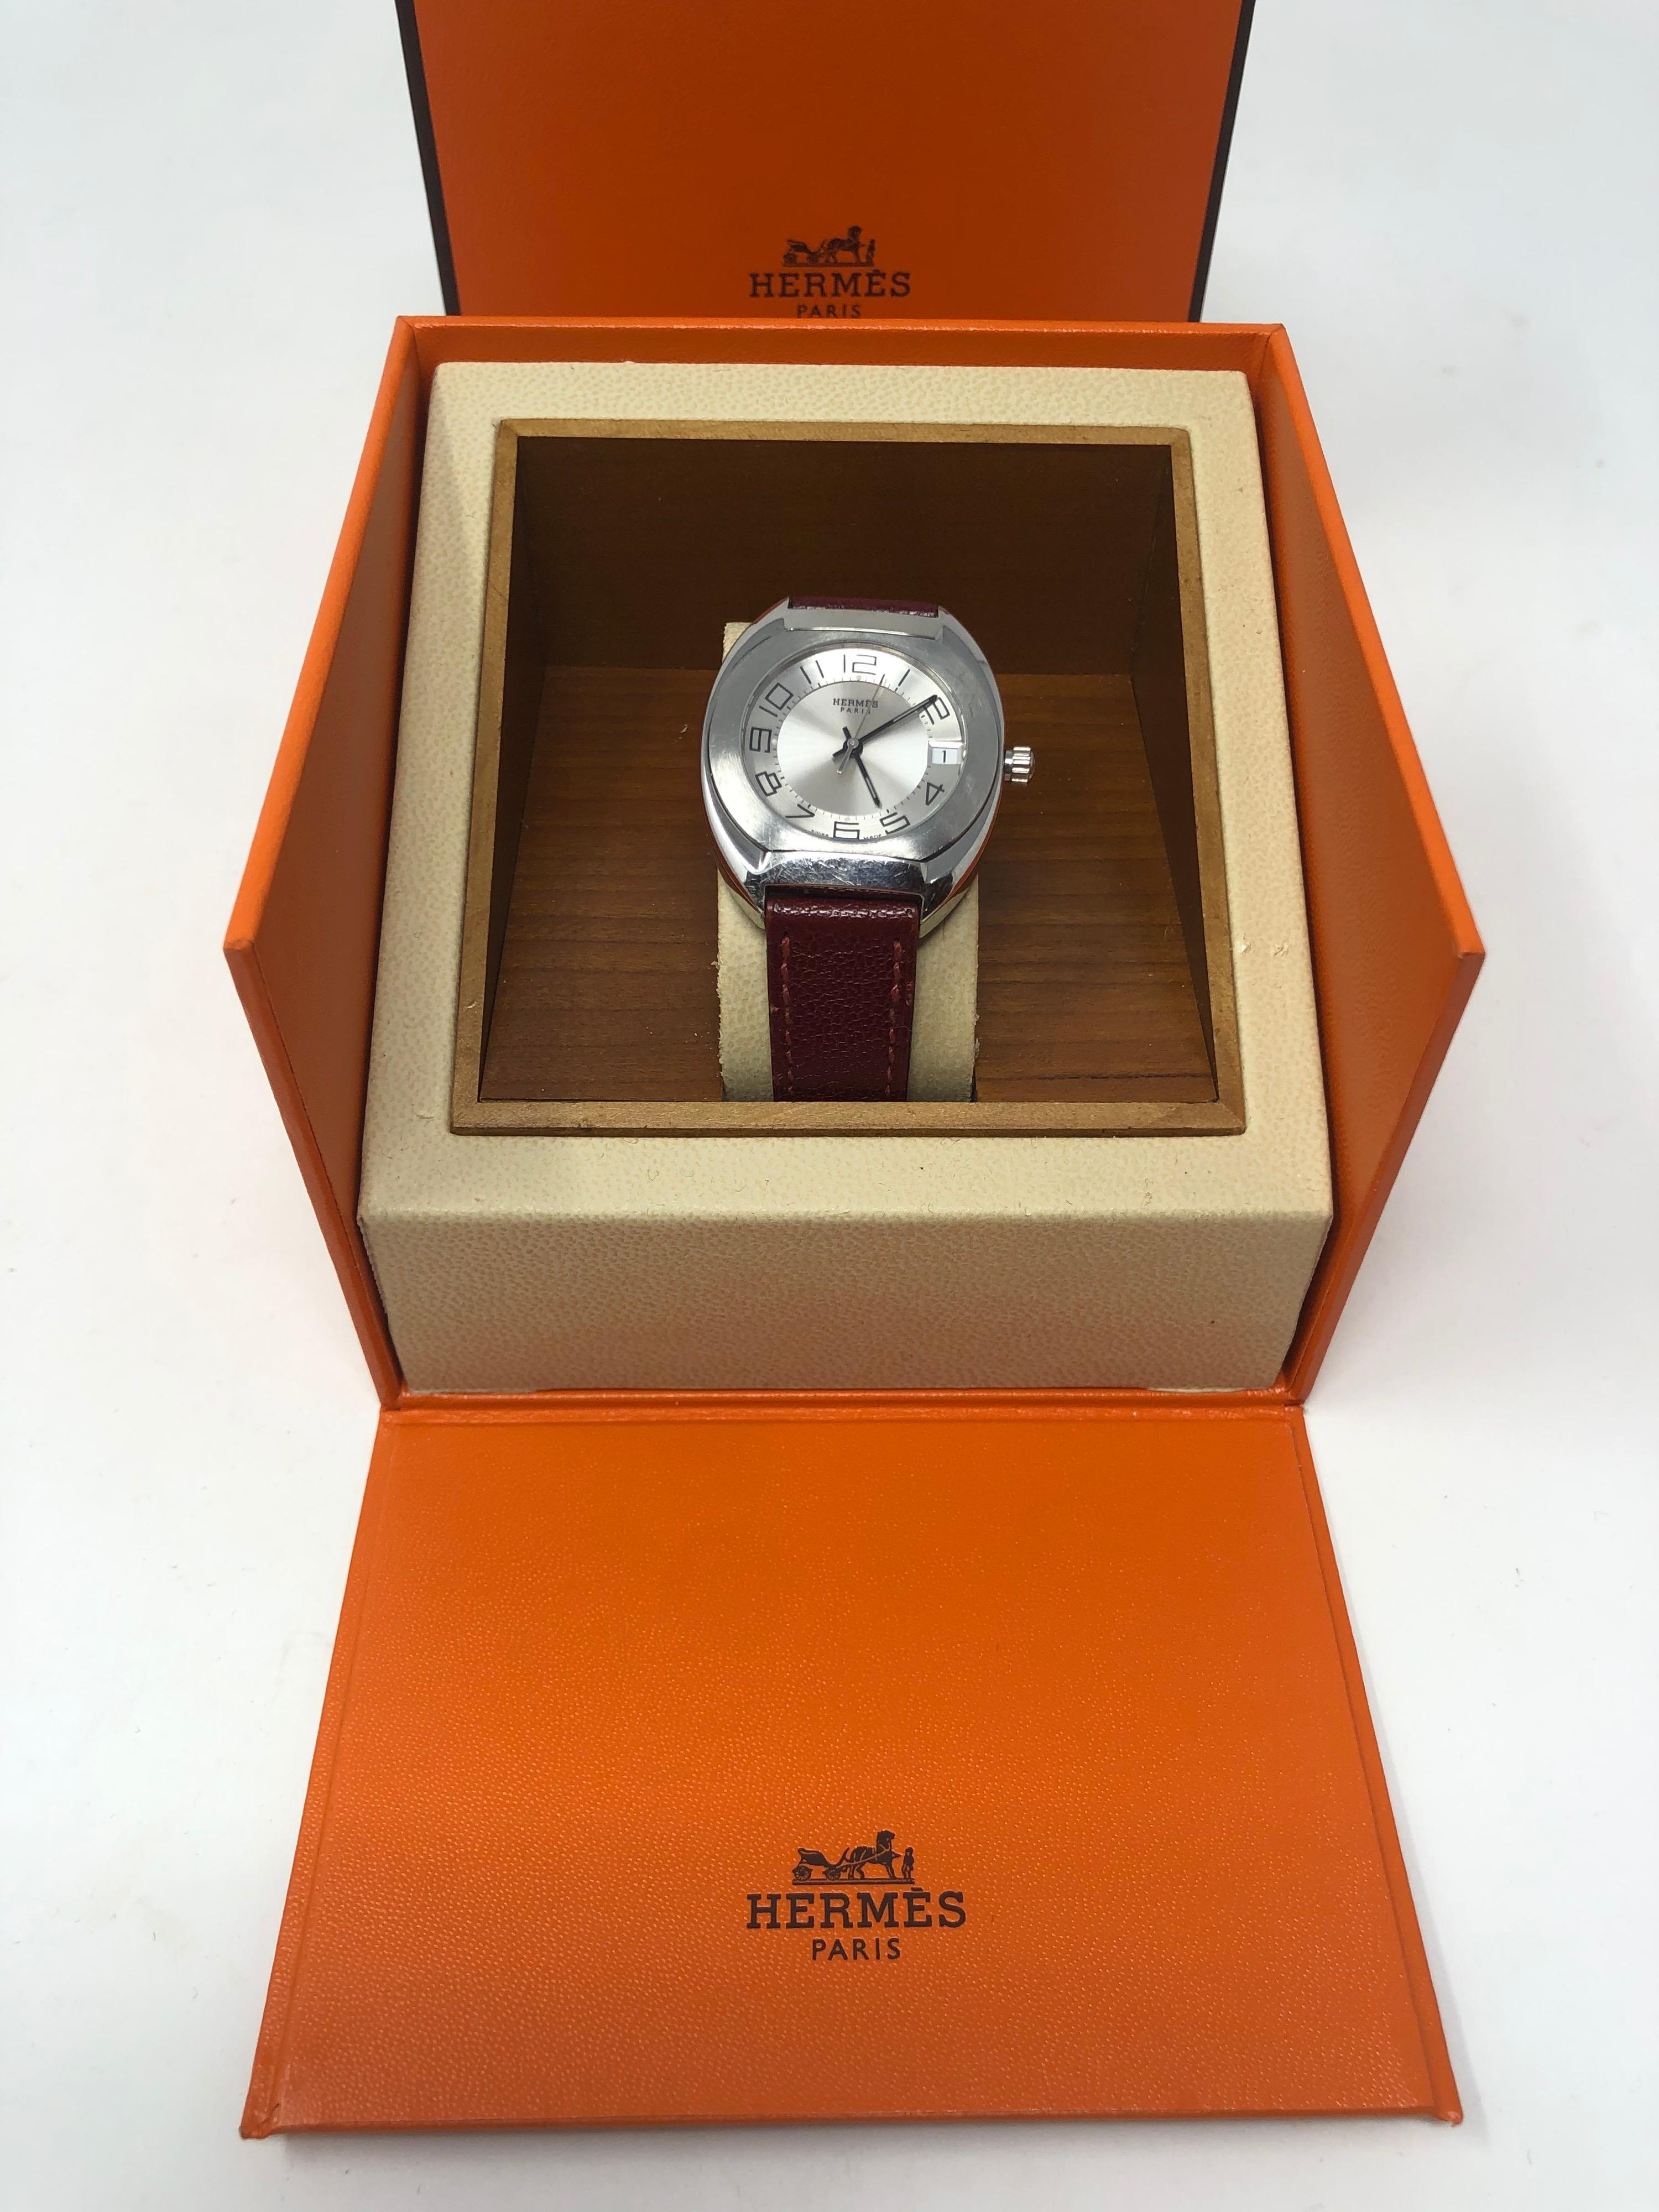 Hermes Vintage Watch. Working watch with Hermes box. Good condition. Can be adjusted. Watch and band all original. Guaranteed authentic. 